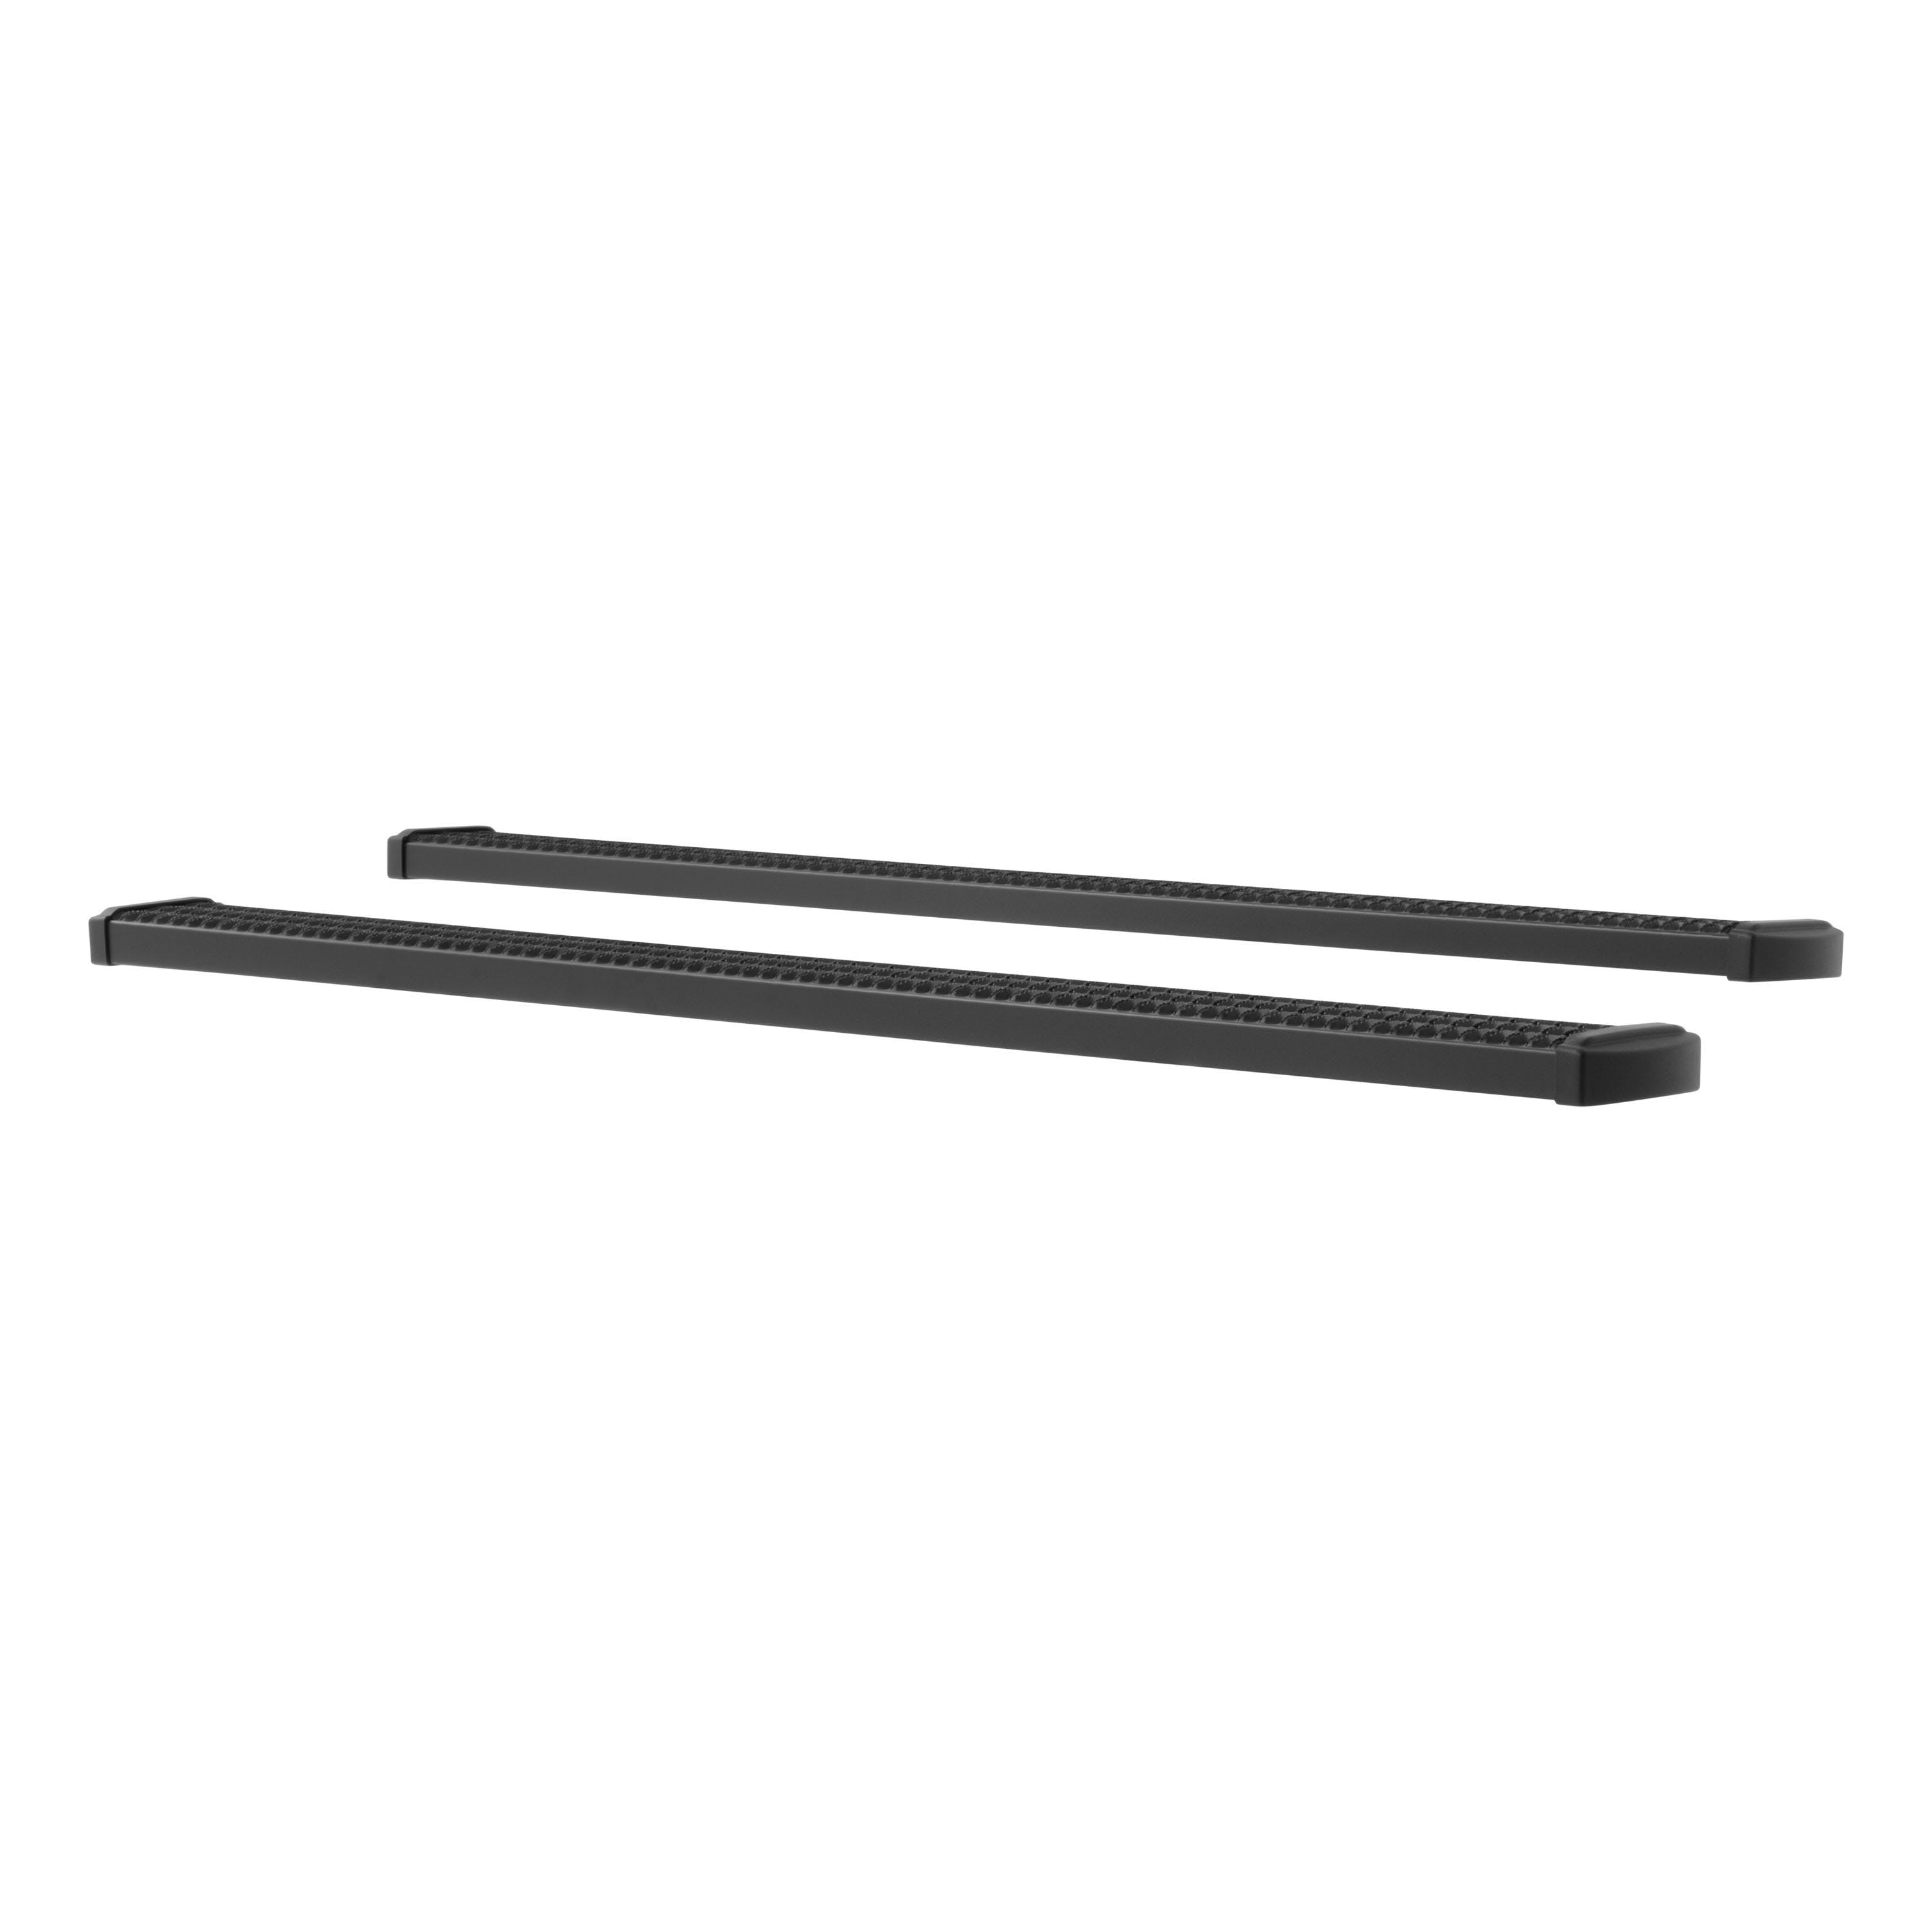 LUVERNE 415088-401113 Grip Step 7 inch Running Boards